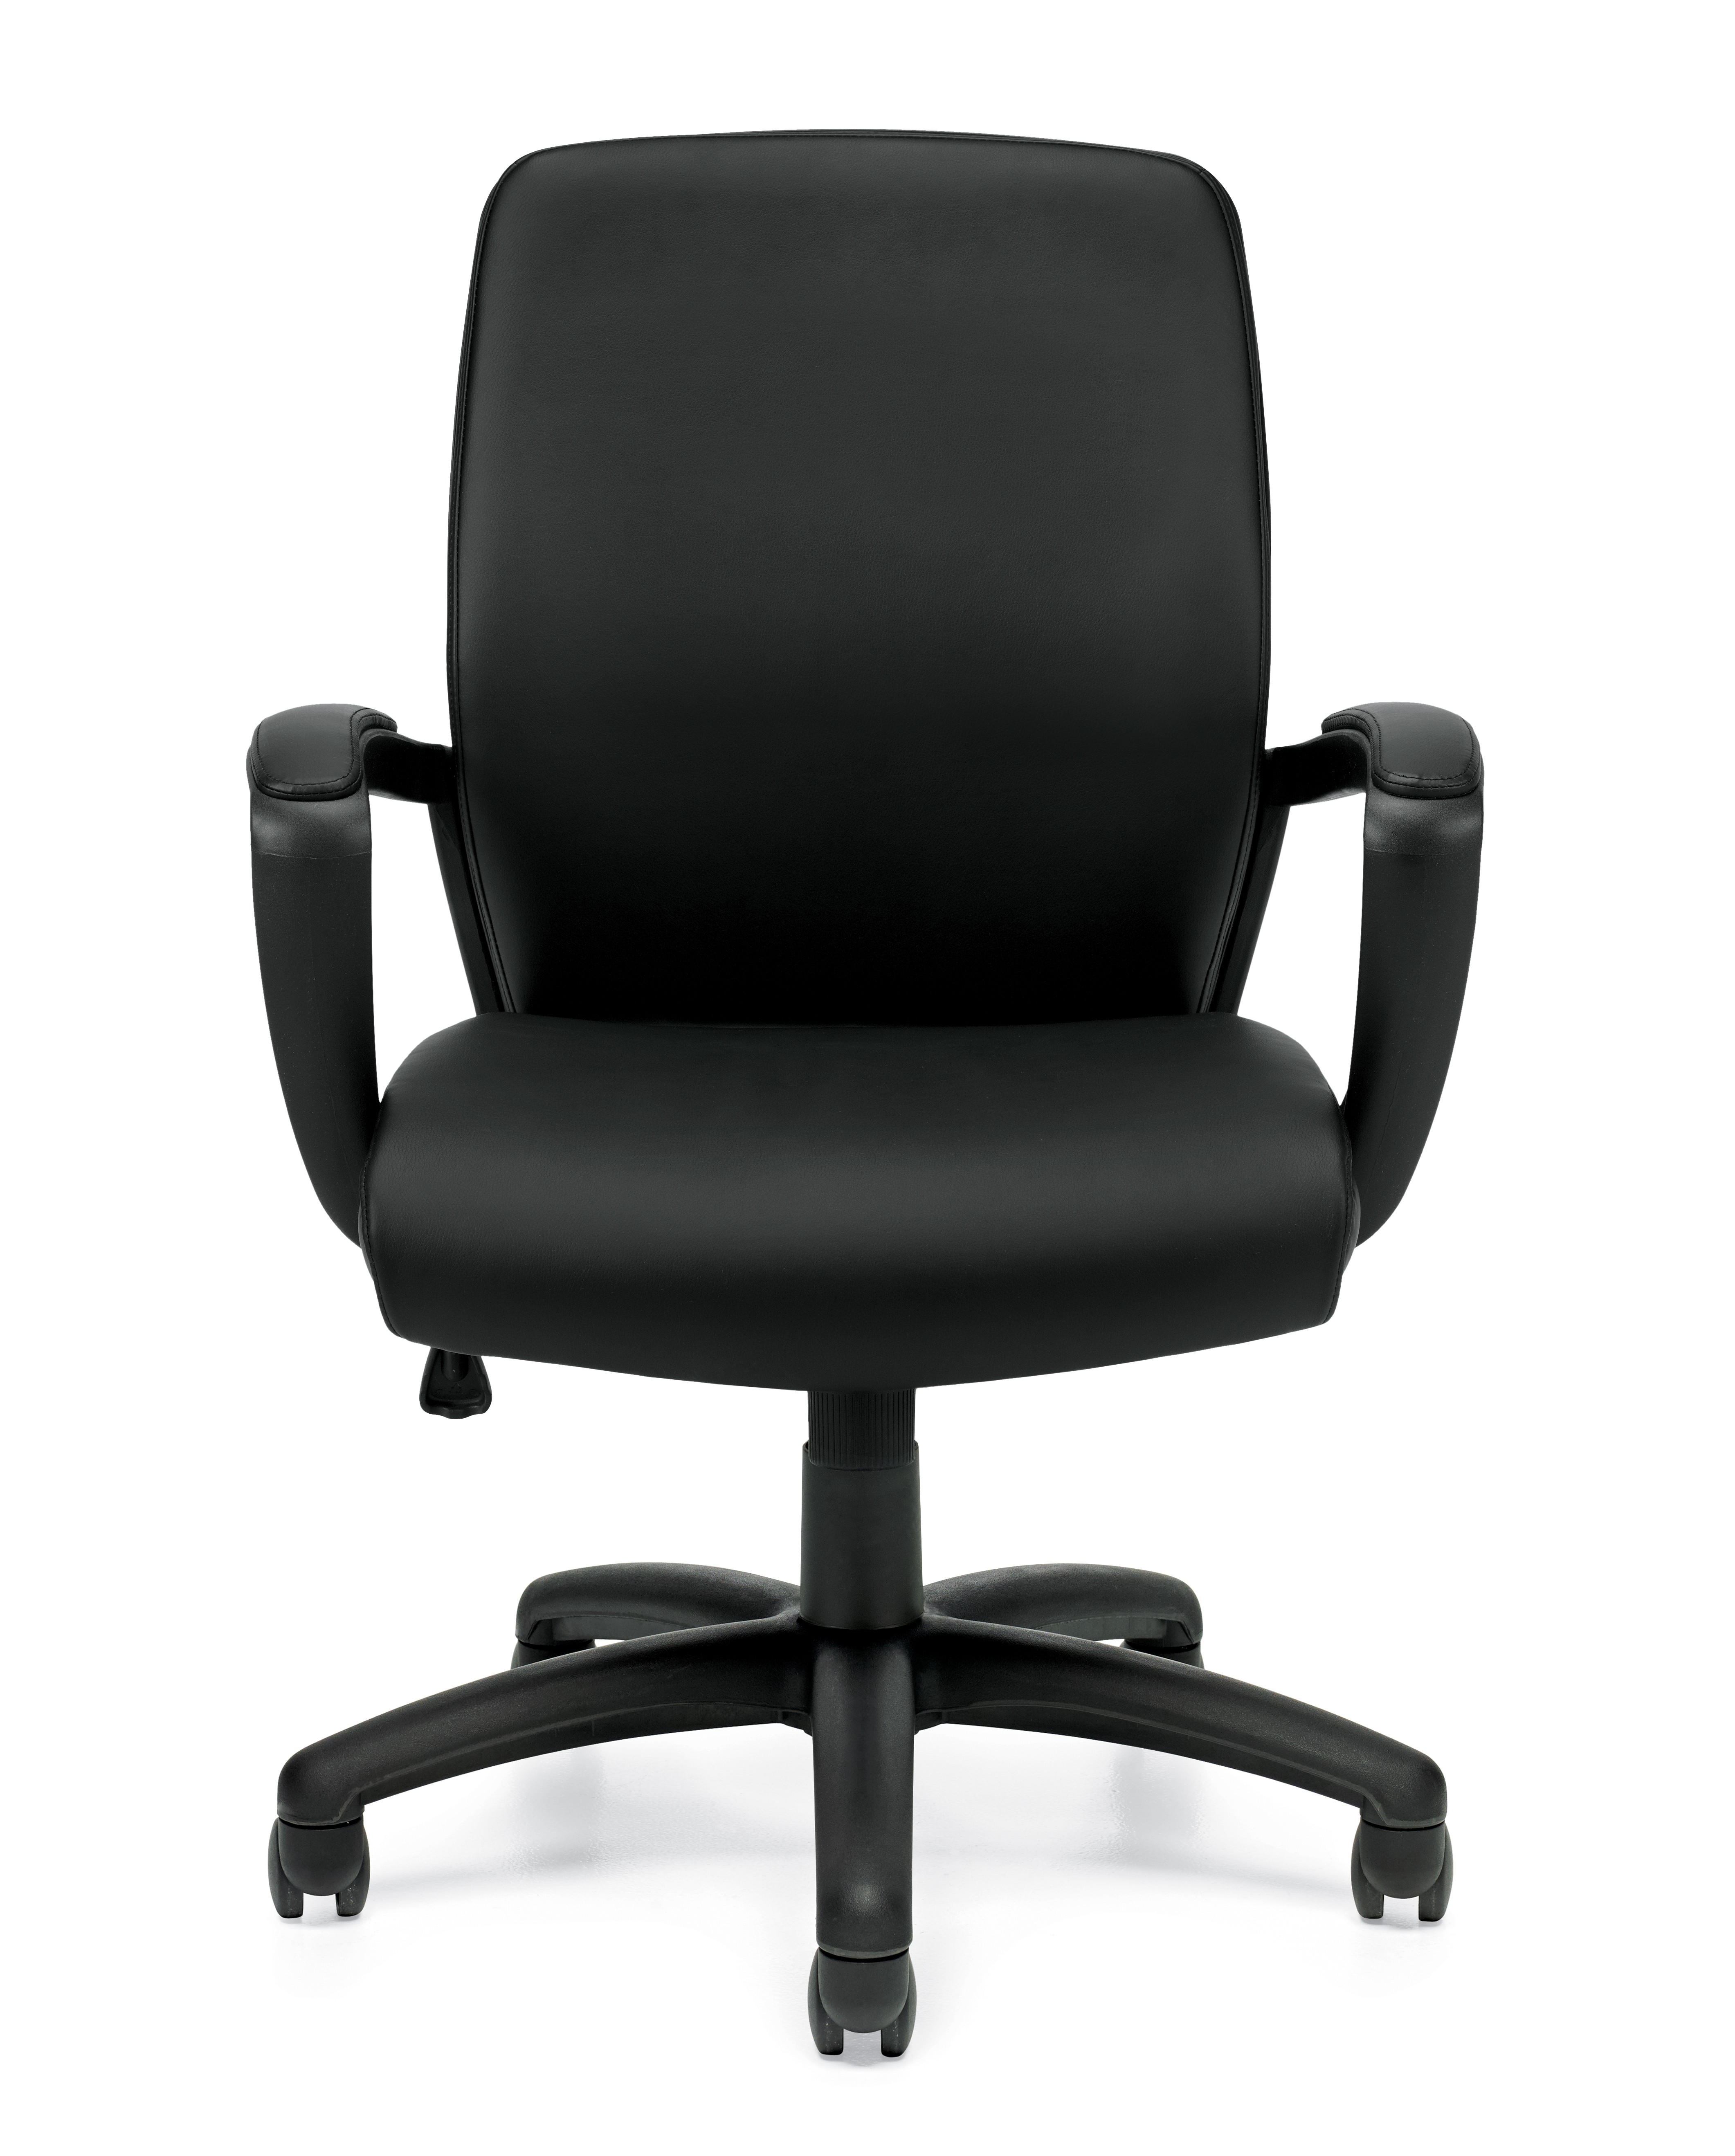 Luxhide Managers Chair